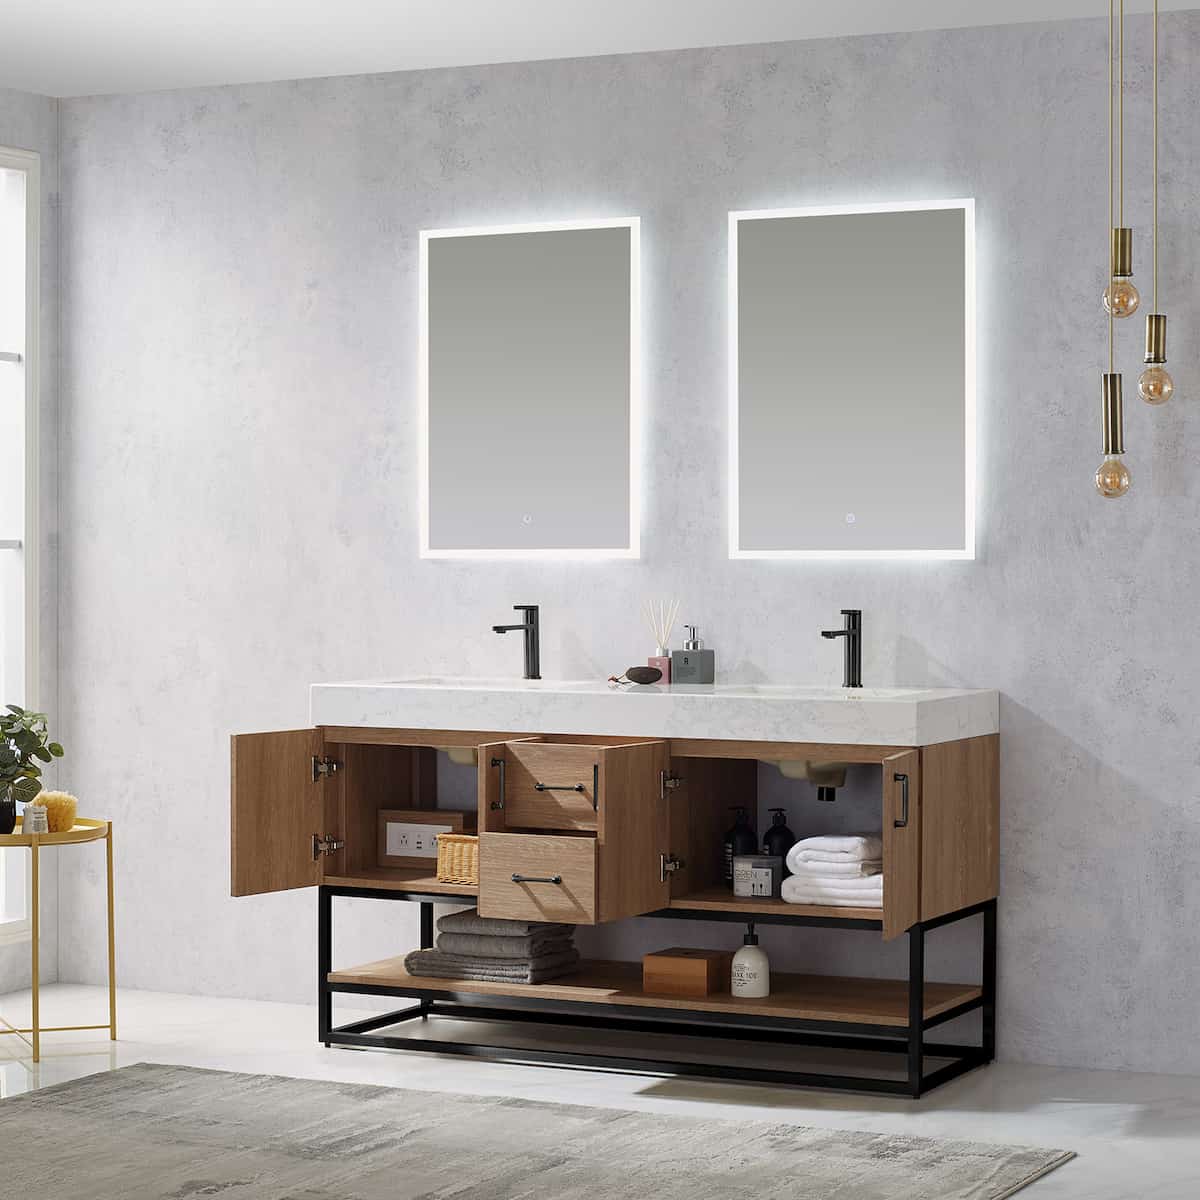 Vinnova Alistair 60 Inch Freestanding Double Vanity in North American Oak and Matte Black Frame with White Grain Stone Countertop With Mirrors Inside 789060B-NO-GW